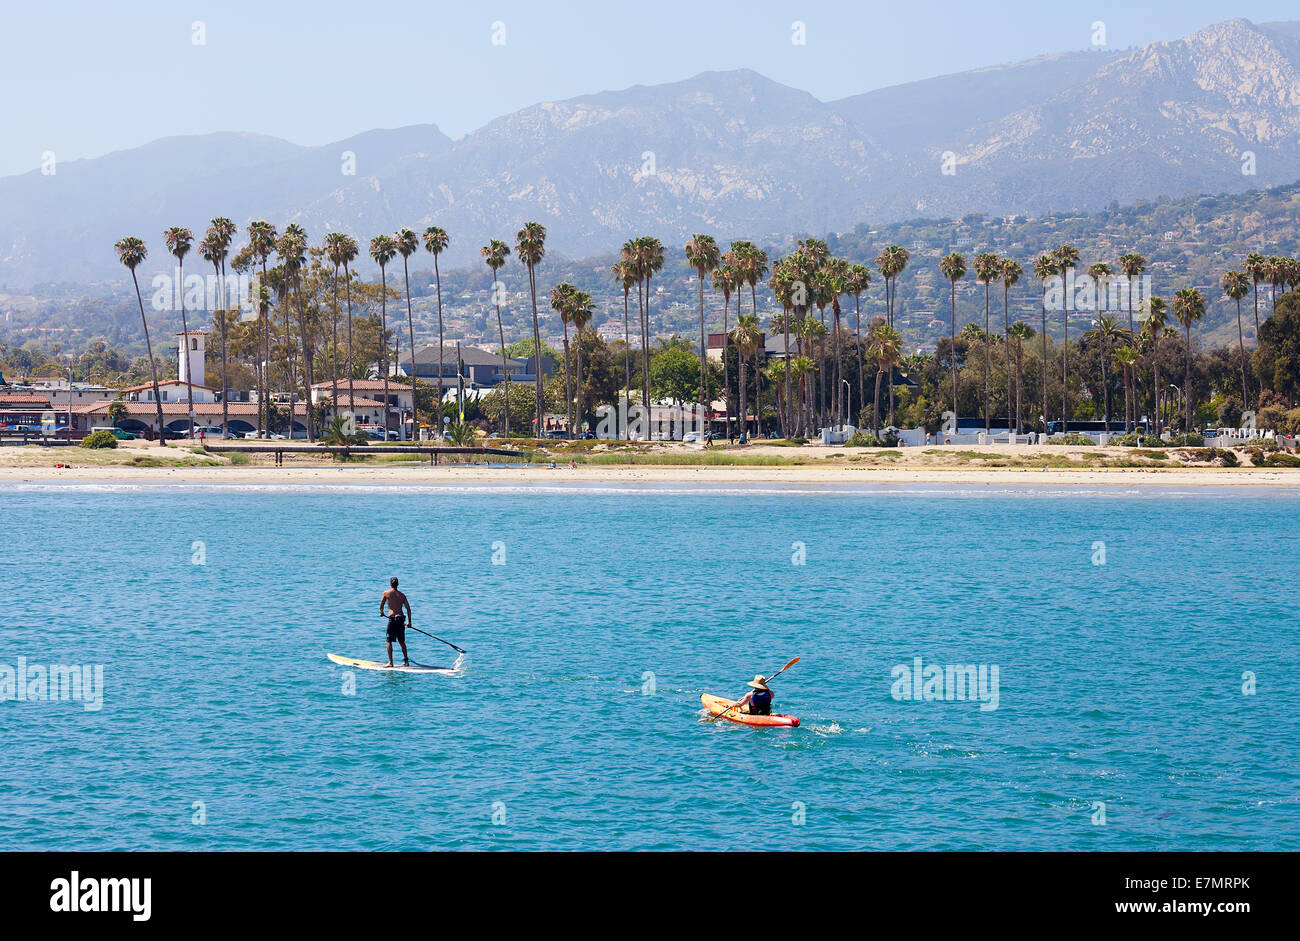 Santa Barbara, California, USA - people on the beach and in the water boating enjoying a sunny day Stock Photo